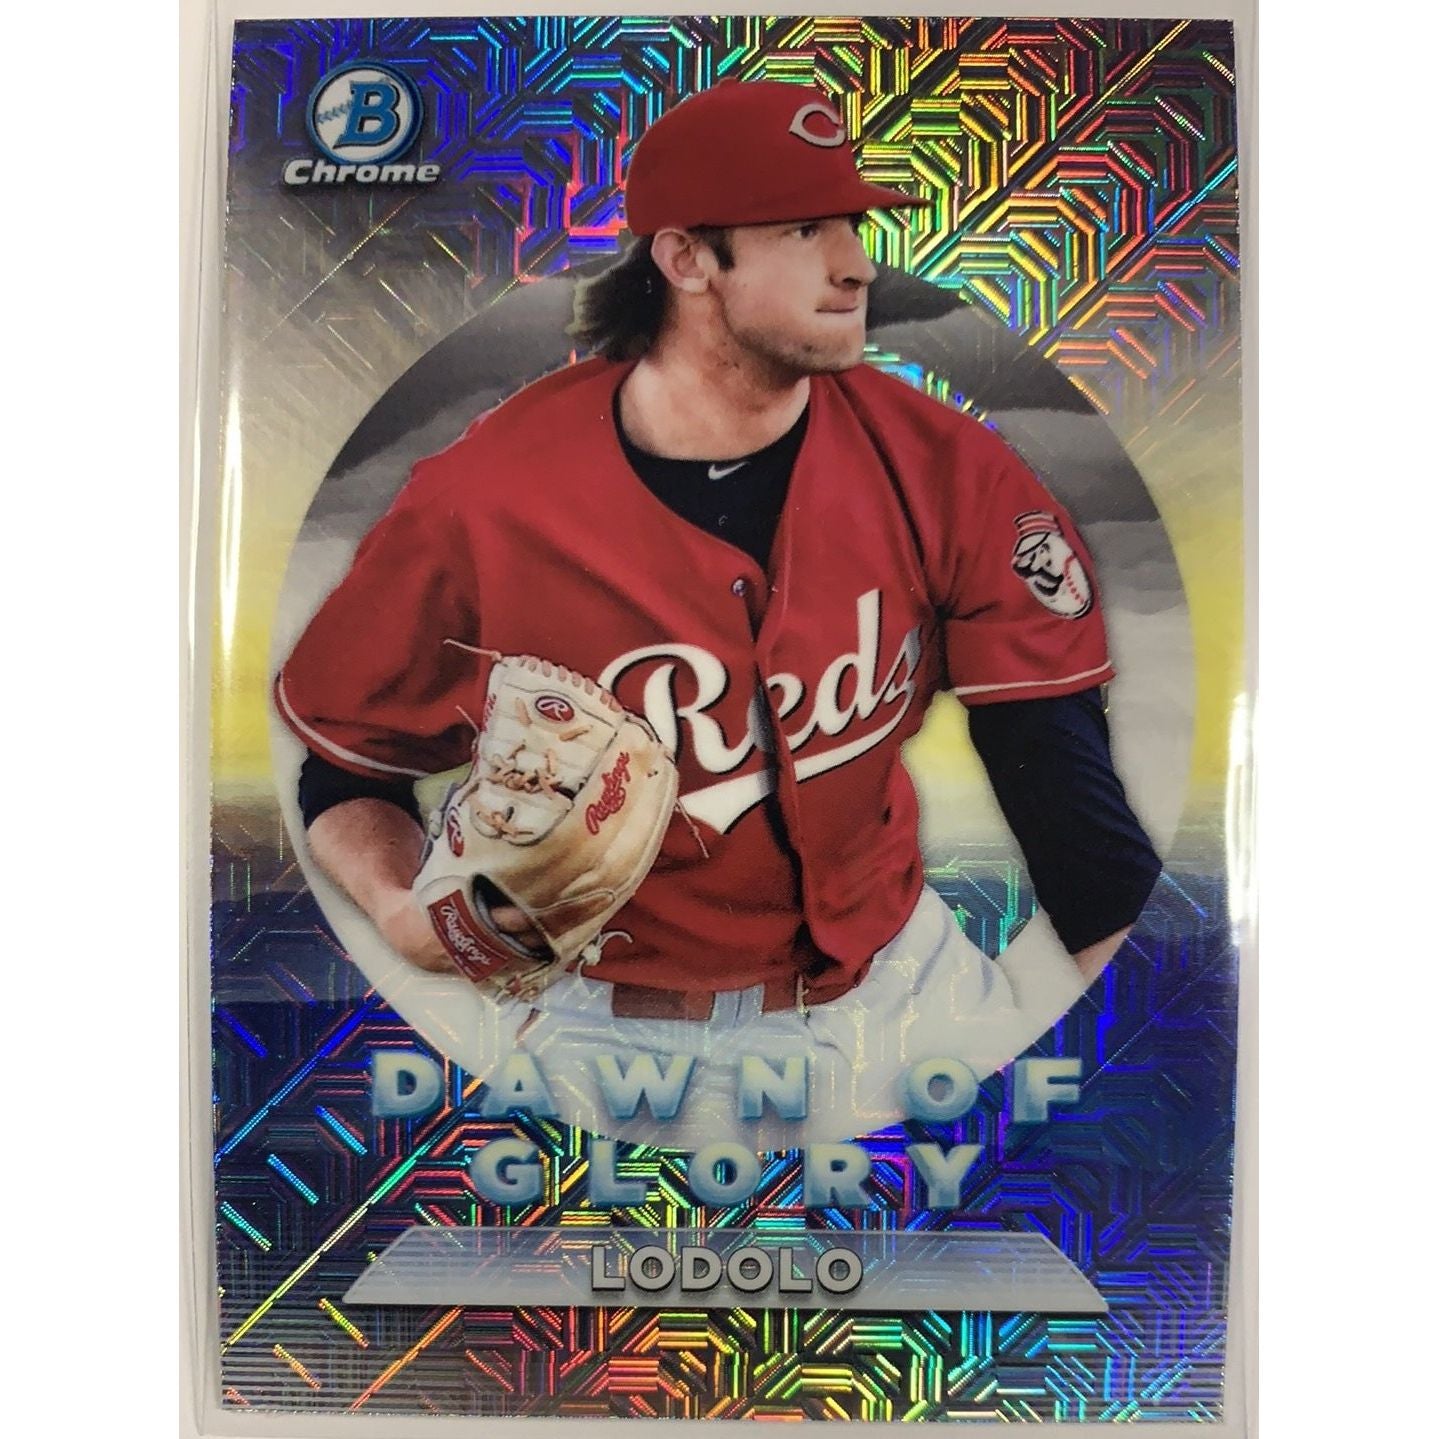  2020 Bowman Chrome Lodolo Dawn of Glory Mojo Refractor  Local Legends Cards & Collectibles